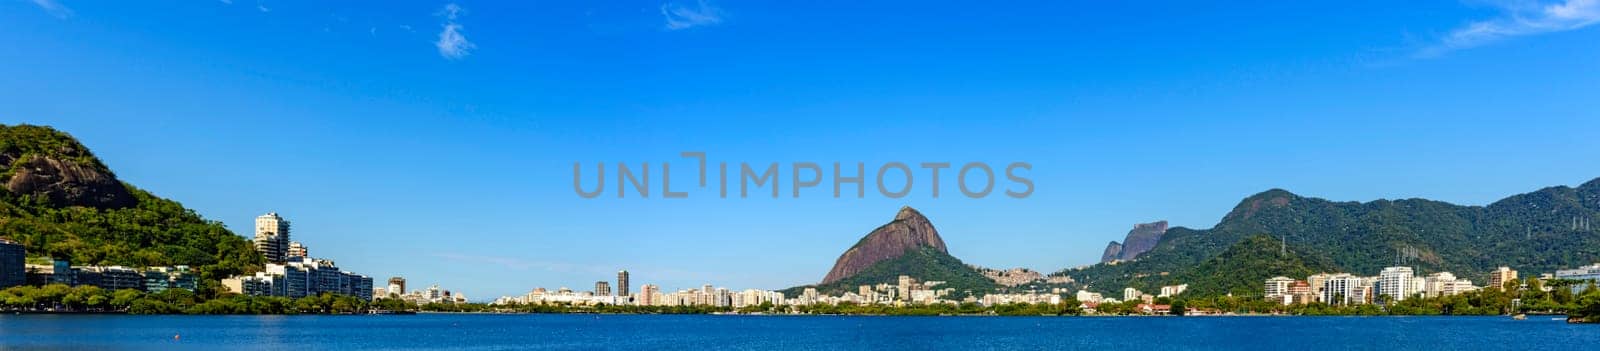 Panoramic image of the famous Rodrigo de Freitas lagoon in Rio de Janeiro surrounded by the city, mountains and greenery on a sunny summer day